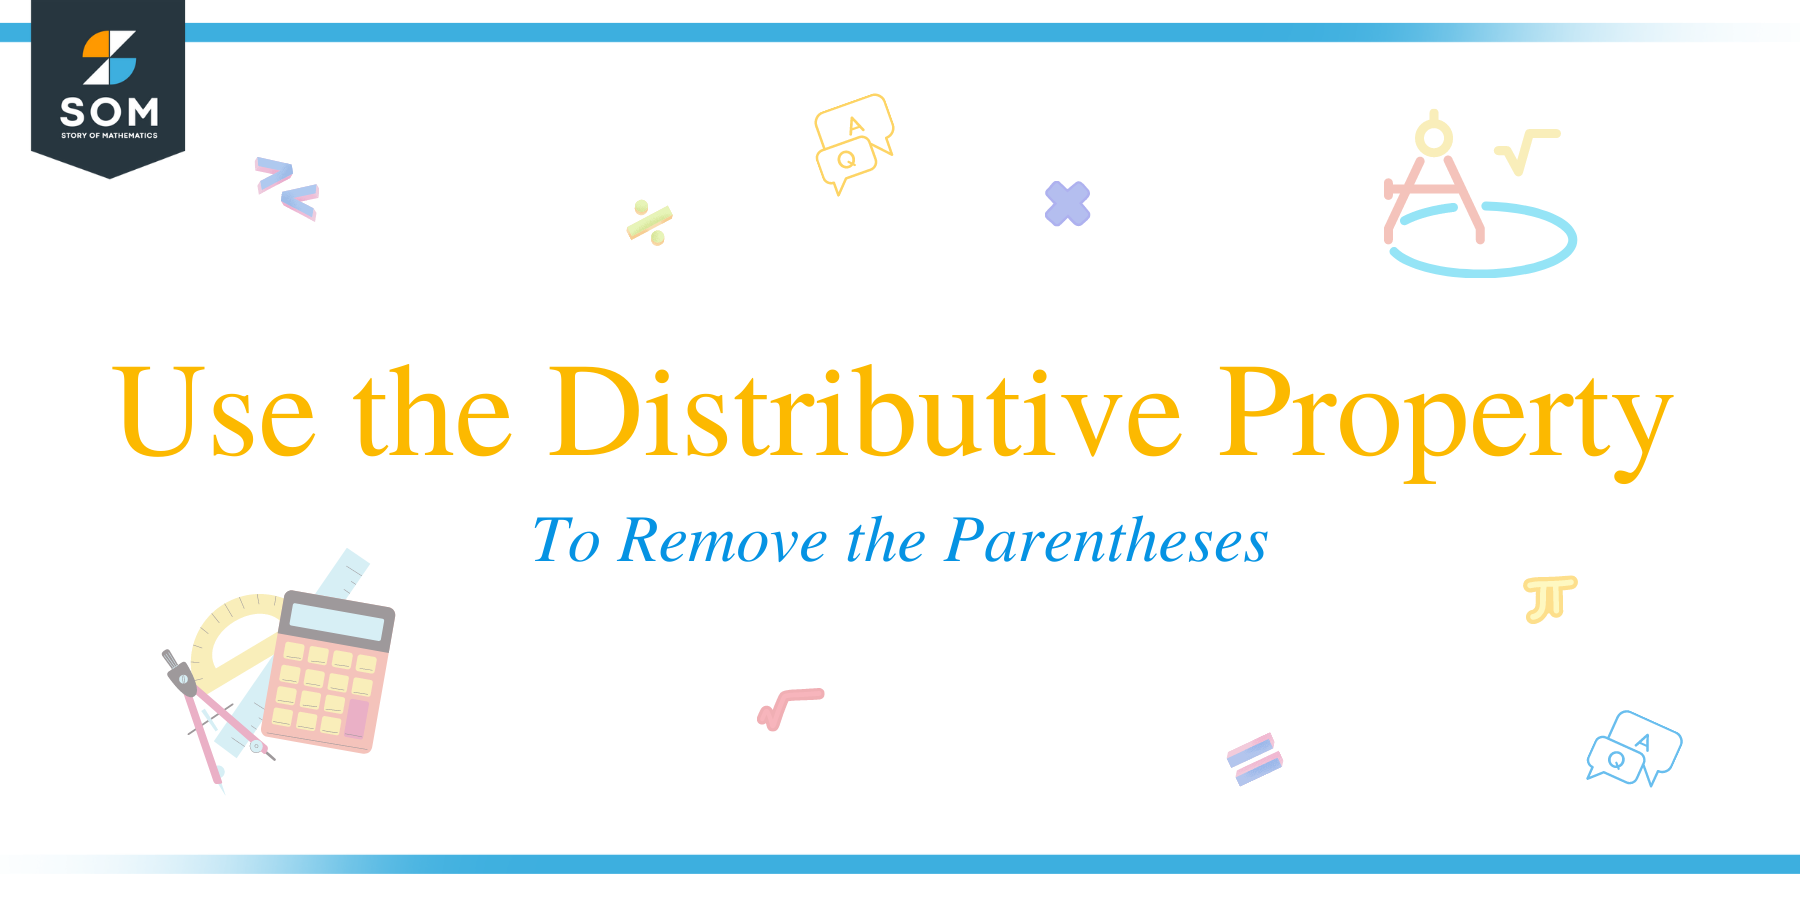 Use the Distributive Property To Remove the Parentheses